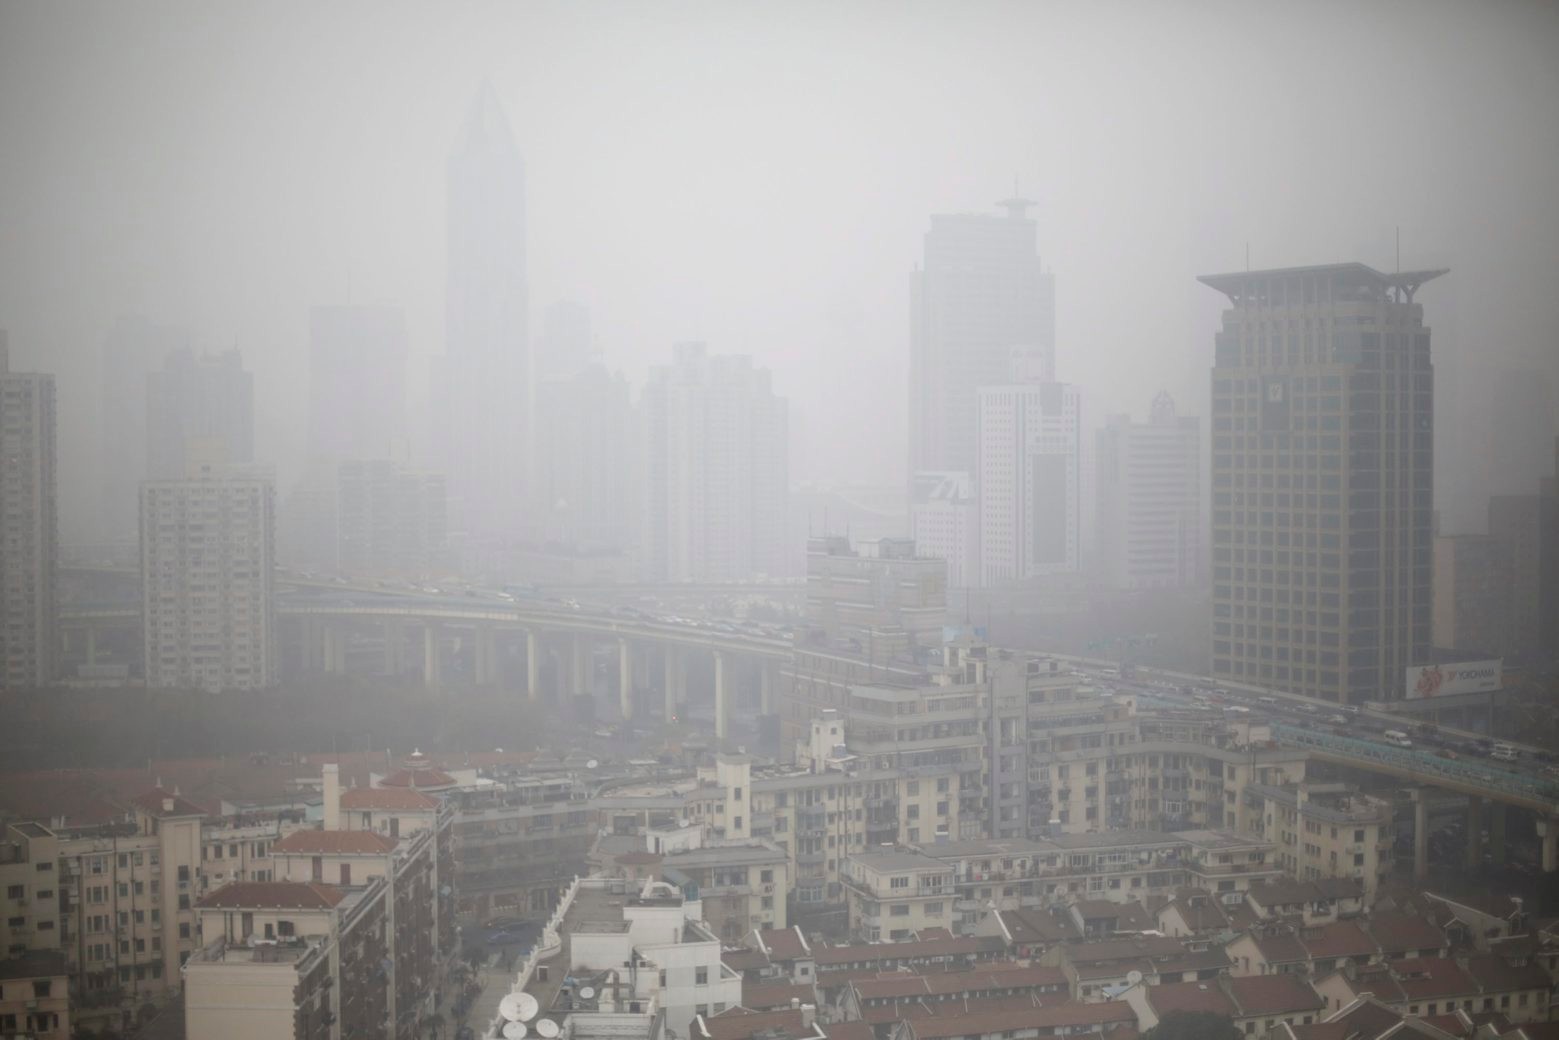 ZUM KLIMAGIPFEL IN PARIS VOM 30. NOVEMBER BIS ZUM 11. DEZEMBER 2015  STELLEN WIR IHNEN FOLGENDES BILDMATERIAL ZUR VERFUEGUNG - Houses and buildings are seen on a heavy haze in Shanghai, China, on Thursday, Jan. 24, 2013. Air pollution is a major problem in China due to the country's rapid pace of industrialization, reliance on coal power, explosive growth in vehicle ownership and disregard for environmental laws, with development often taking priority over health. The pollution typically gets worse in the winter because of an increase in coal burning. (KEYSTONE/AP/Eugene Hoshiko) UN KLIMAKONFERENZ